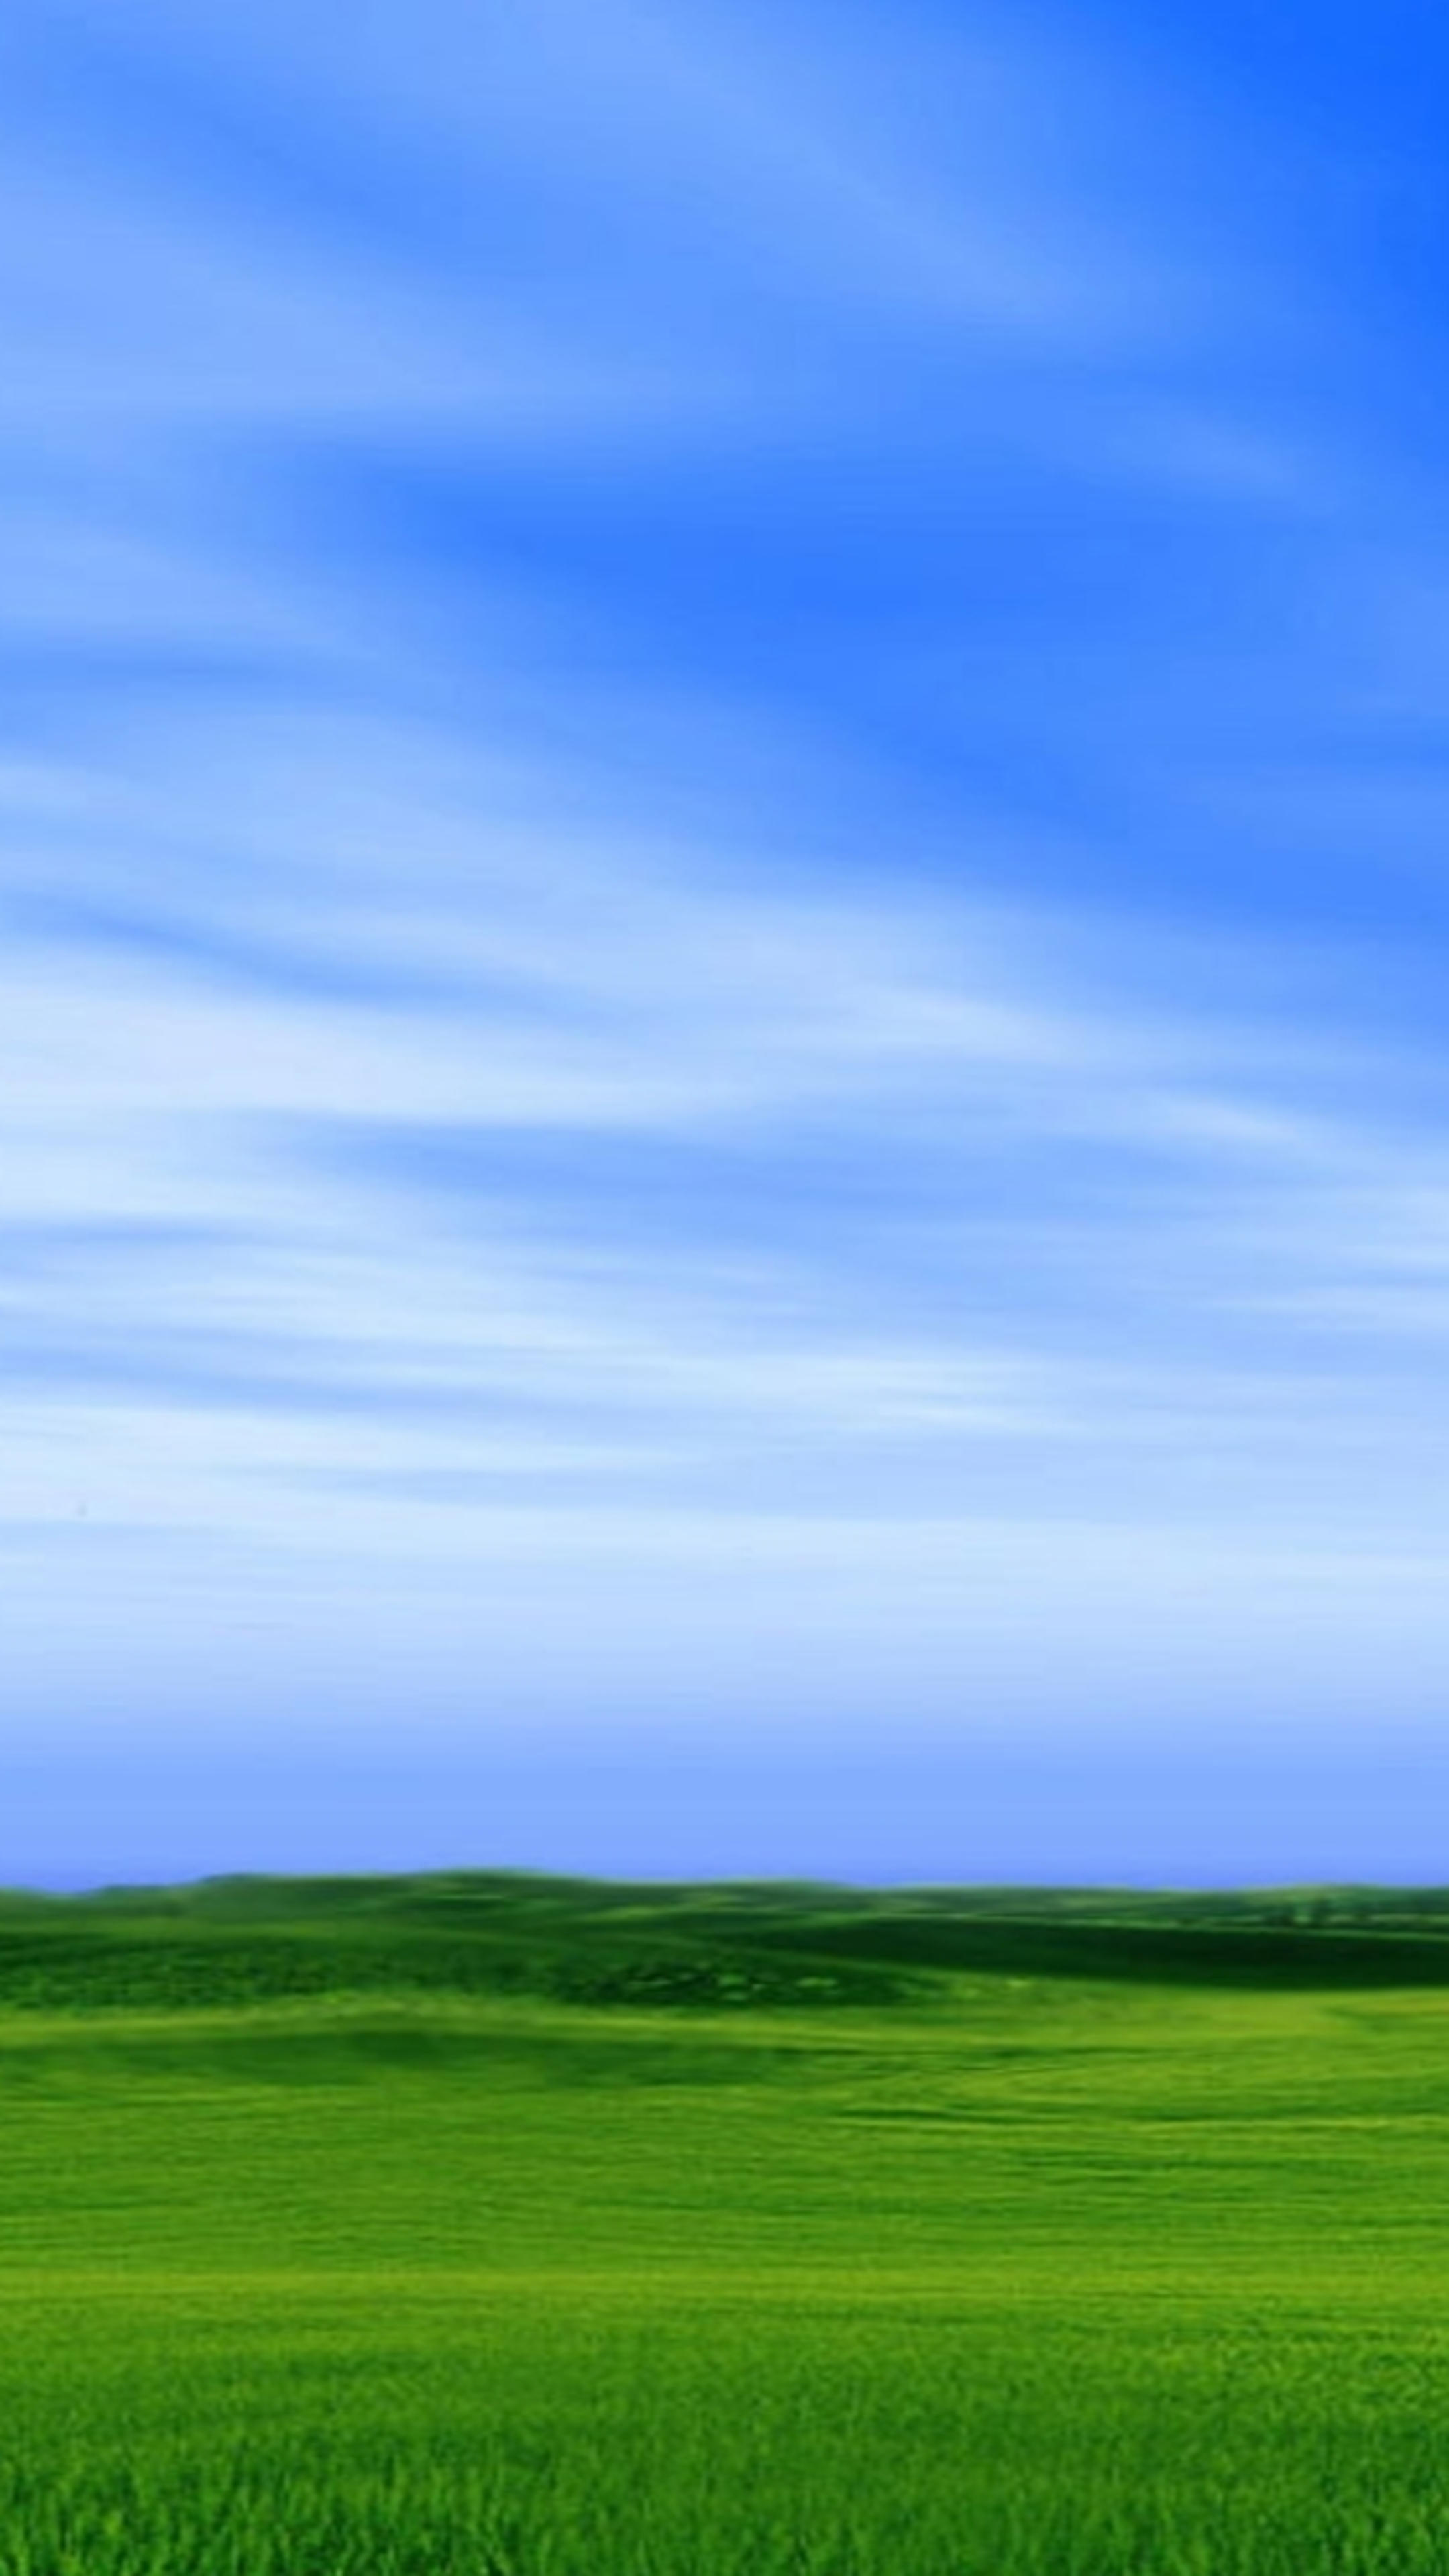 Grassland: Green belt, Hinterland, Middle of nowhere, Outback, Province, Tranquility. 2160x3840 4K Wallpaper.